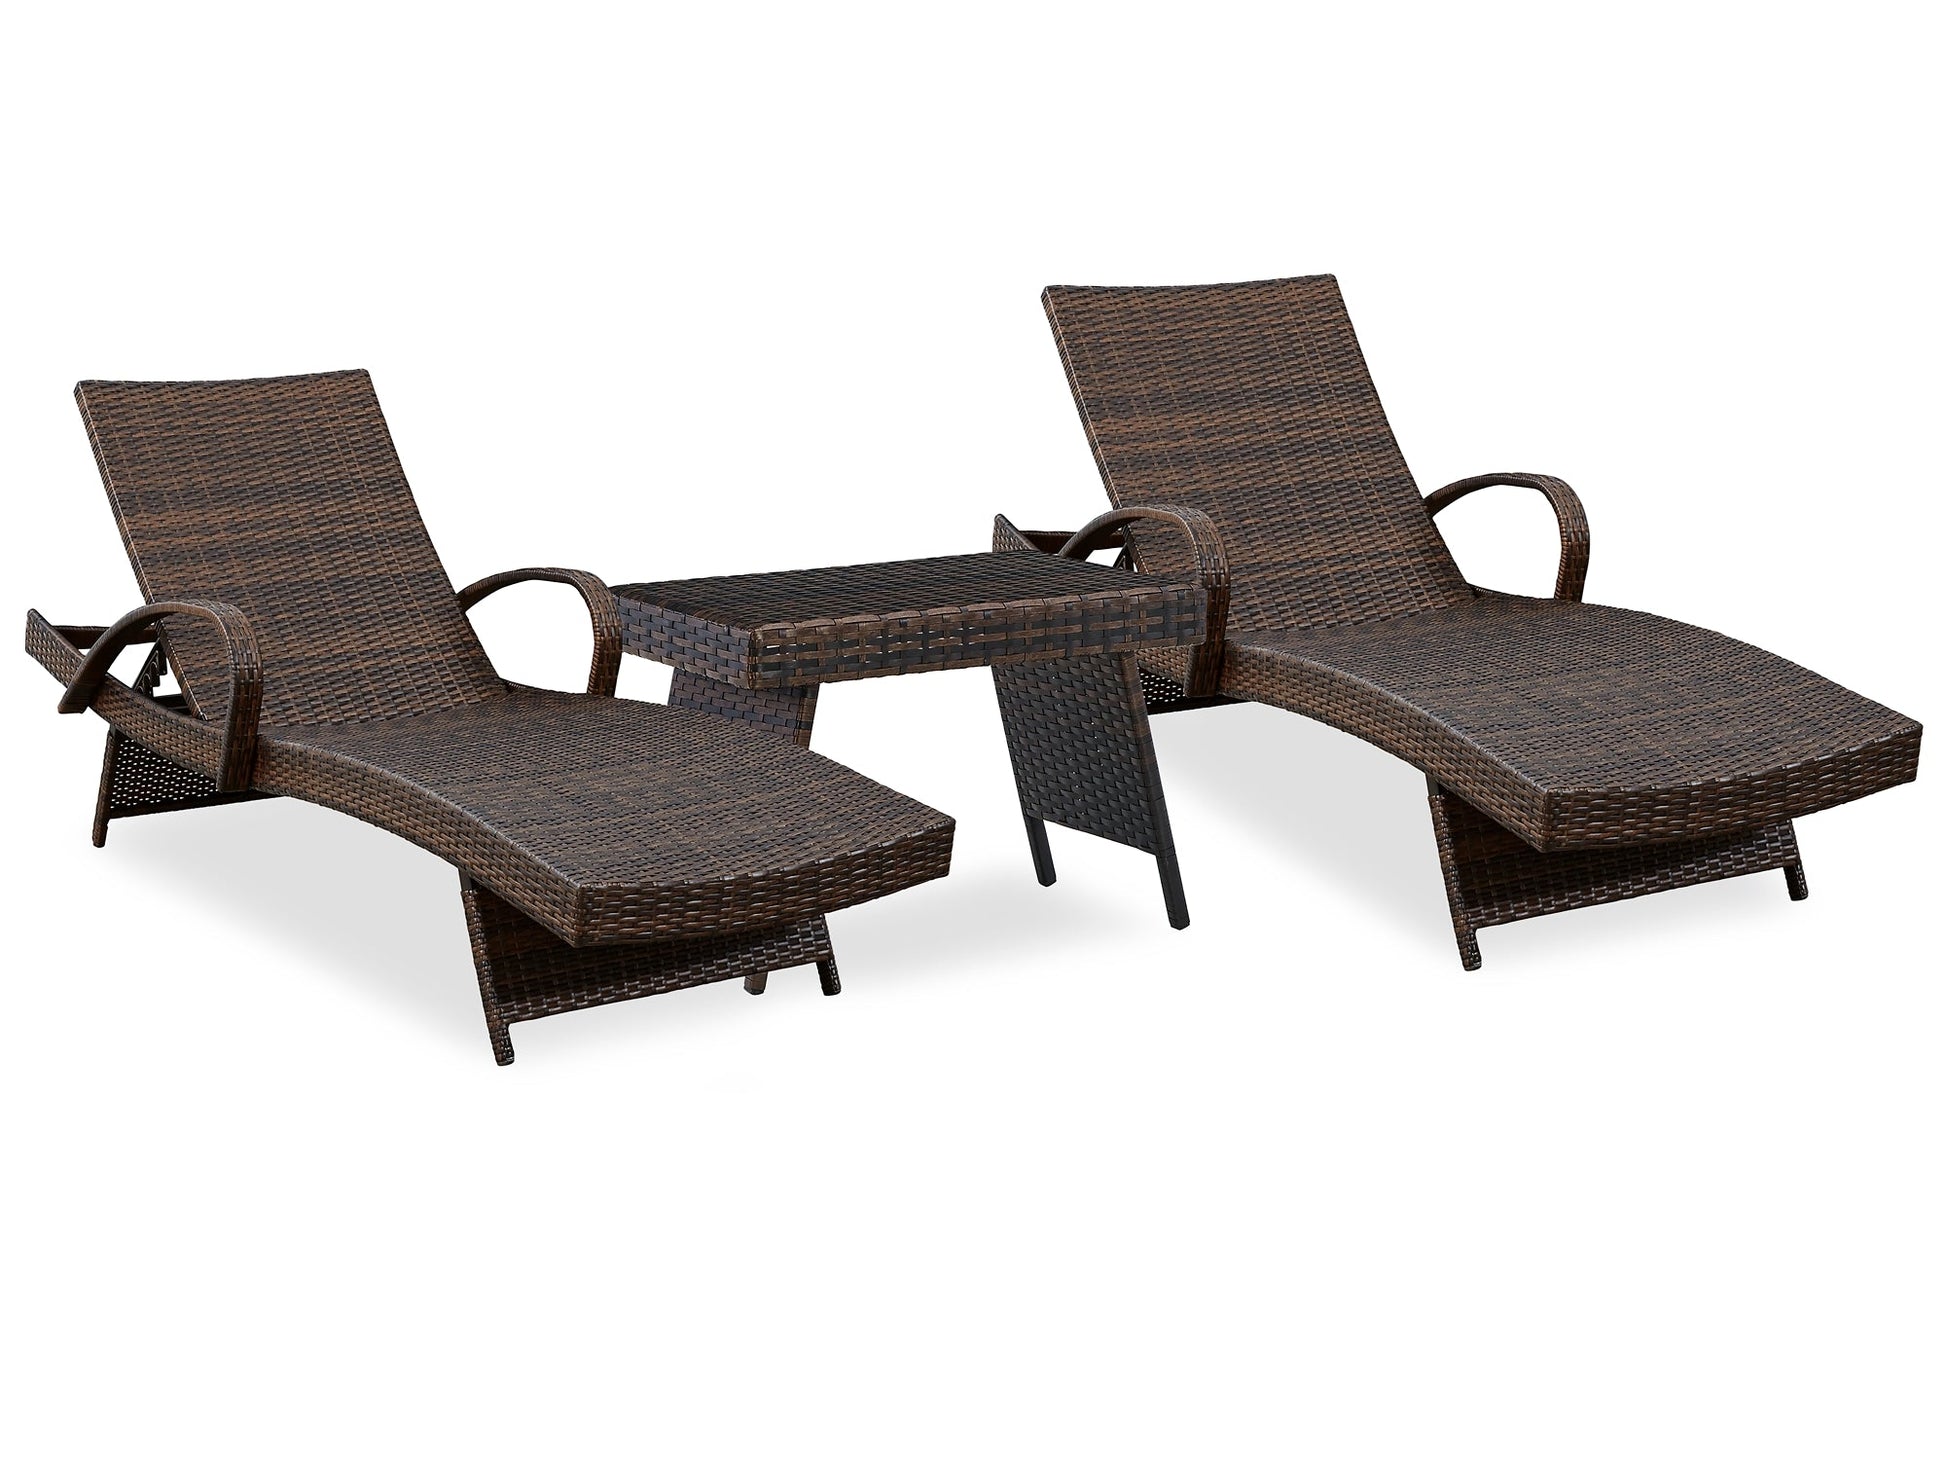 Kantana 2 Chaise Lounge Chairs with End Table at Walker Mattress and Furniture Locations in Cedar Park and Belton TX.